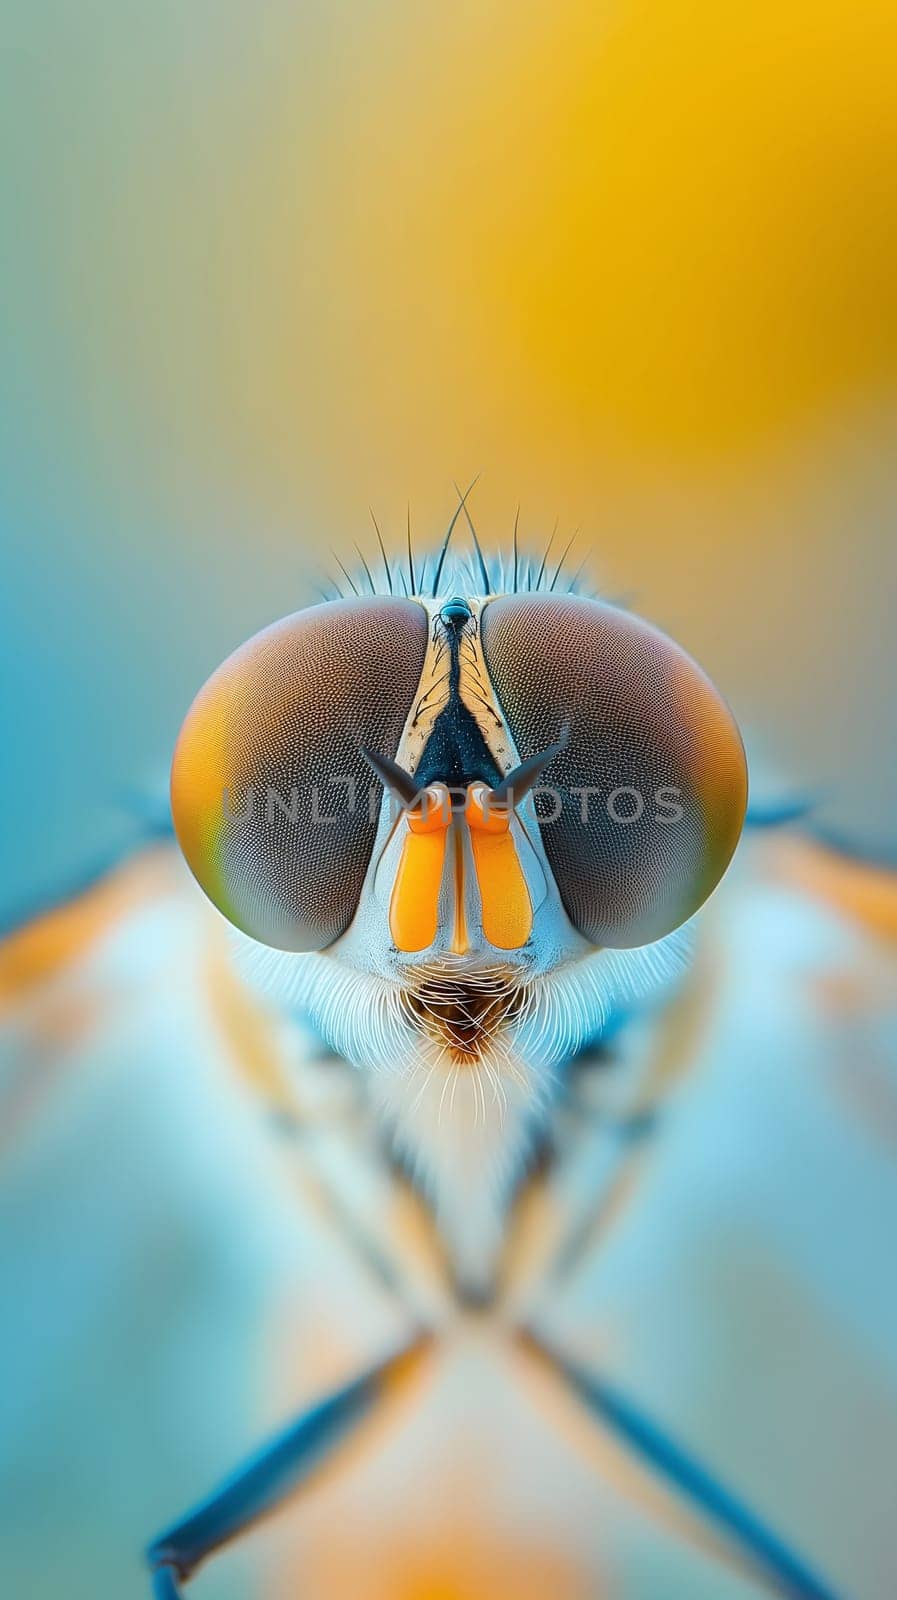 Close-Up View of a Hoverfly Eyes and Face Against a Soft Multicolored Background by chrisroll